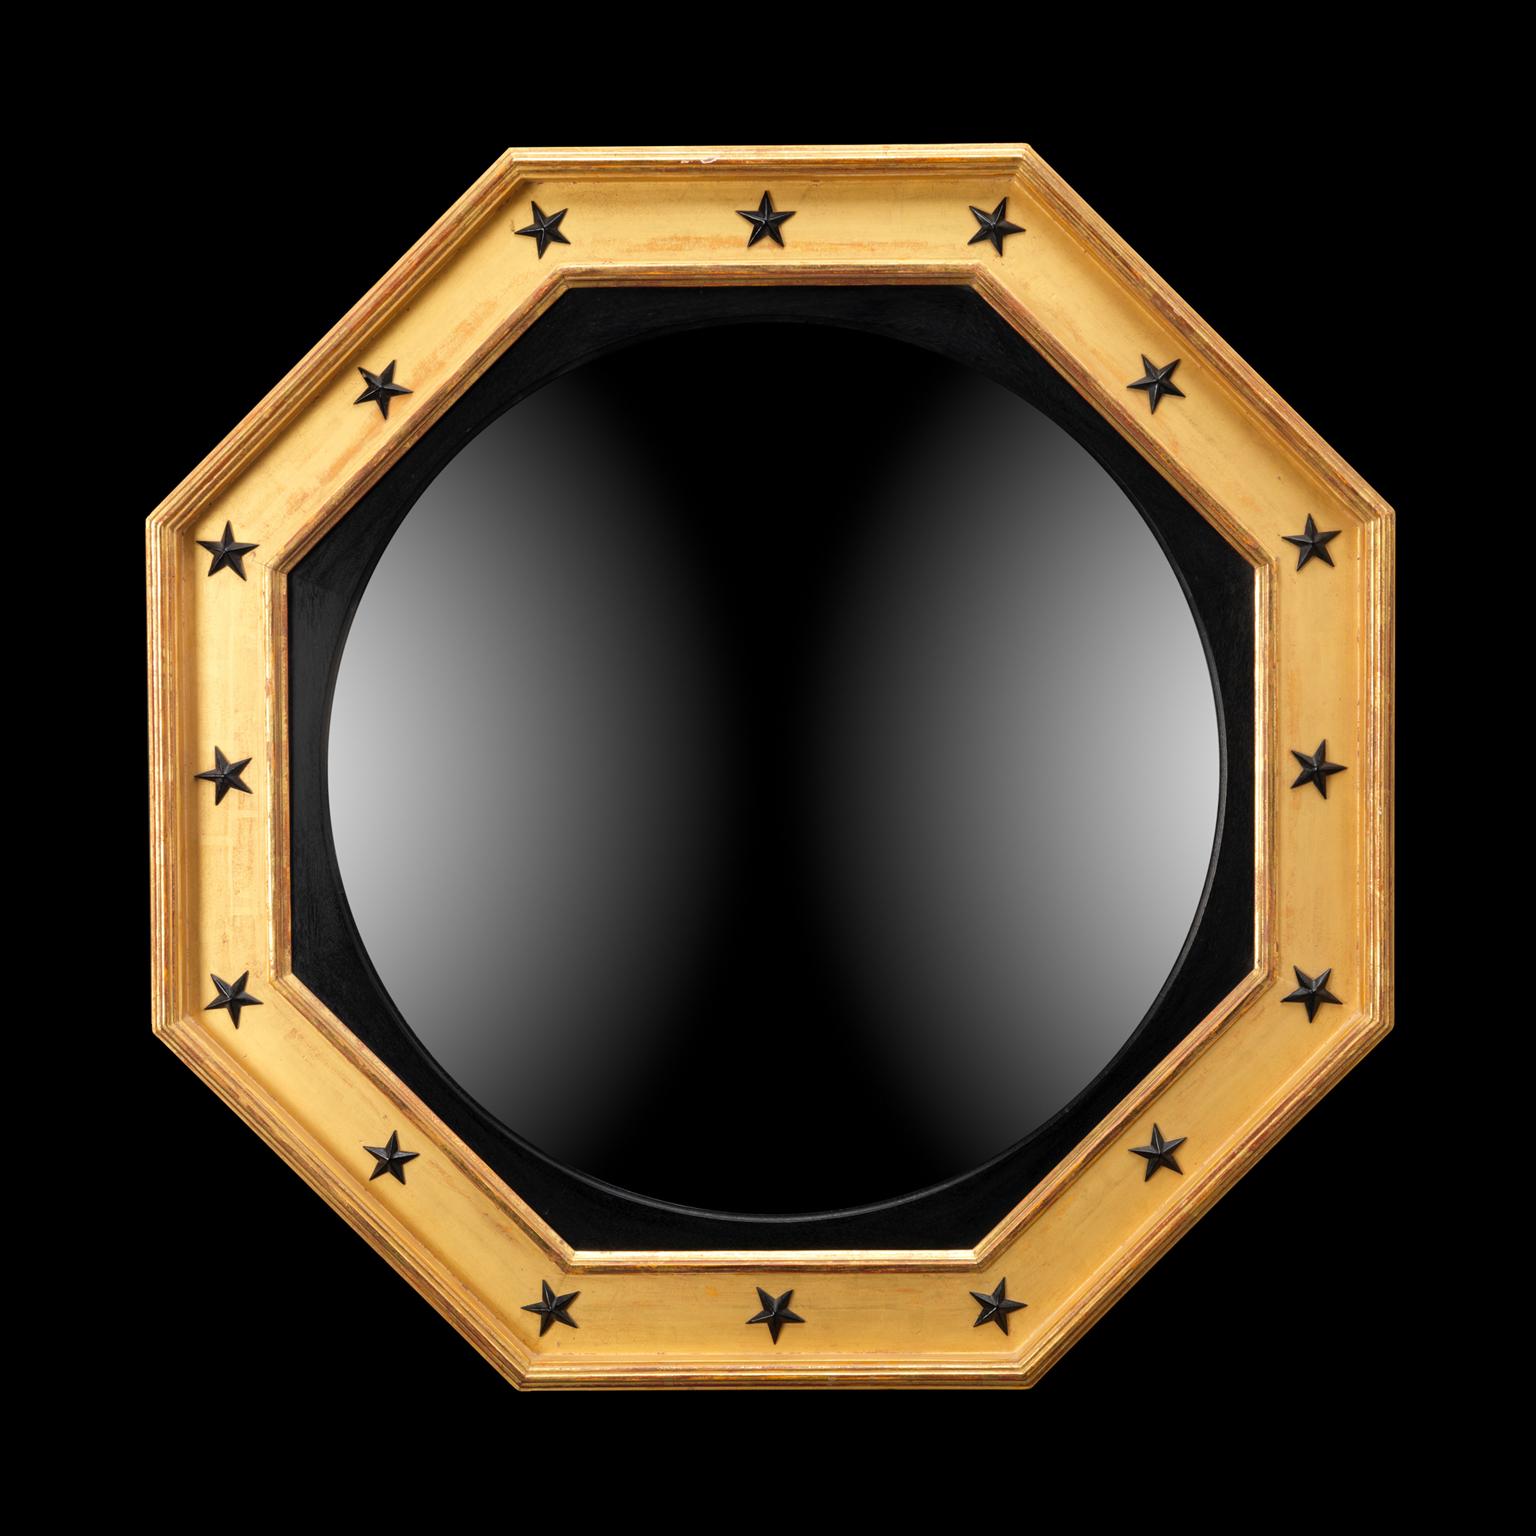 A fine gilt and ebony octagonal round glass convex mirror in the manner of Thomas Hope with ebonized star decoration.

We are currently working to a 30-36 week lead time.